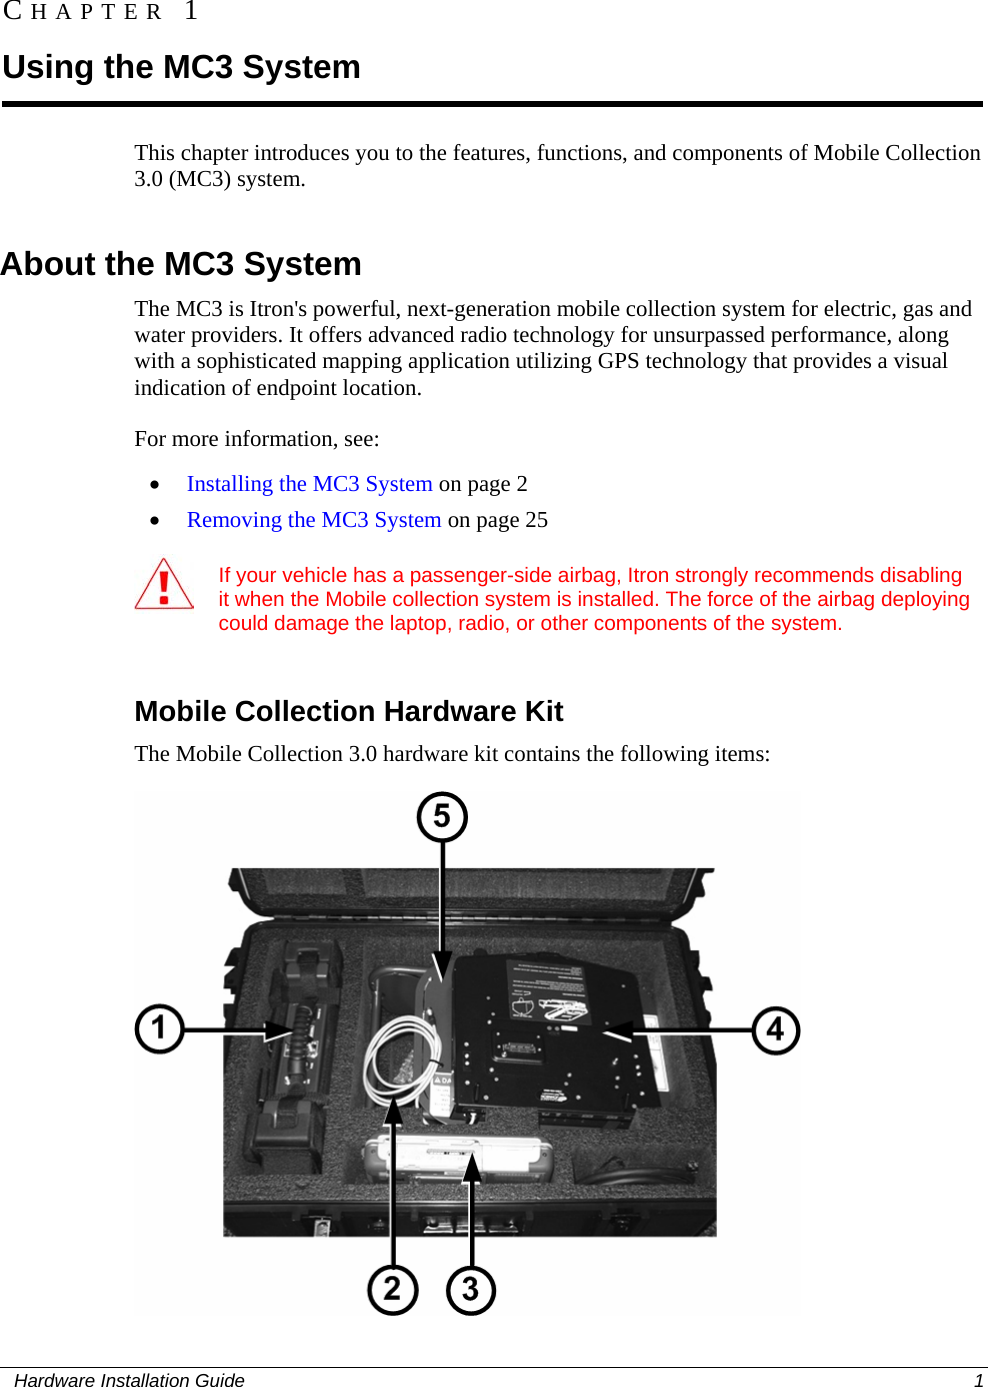  CHAPTER 1 Using the MC3 System This chapter introduces you to the features, functions, and components of Mobile Collection 3.0 (MC3) system.    About the MC3 System The MC3 is Itron&apos;s powerful, next-generation mobile collection system for electric, gas and water providers. It offers advanced radio technology for unsurpassed performance, along with a sophisticated mapping application utilizing GPS technology that provides a visual indication of endpoint location.  For more information, see: • Installing the MC3 System on page 2 • Removing the MC3 System on page 25    If your vehicle has a passenger-side airbag, Itron strongly recommends disabling it when the Mobile collection system is installed. The force of the airbag deploying could damage the laptop, radio, or other components of the system.     Mobile Collection Hardware Kit The Mobile Collection 3.0 hardware kit contains the following items:    Hardware Installation Guide  1  